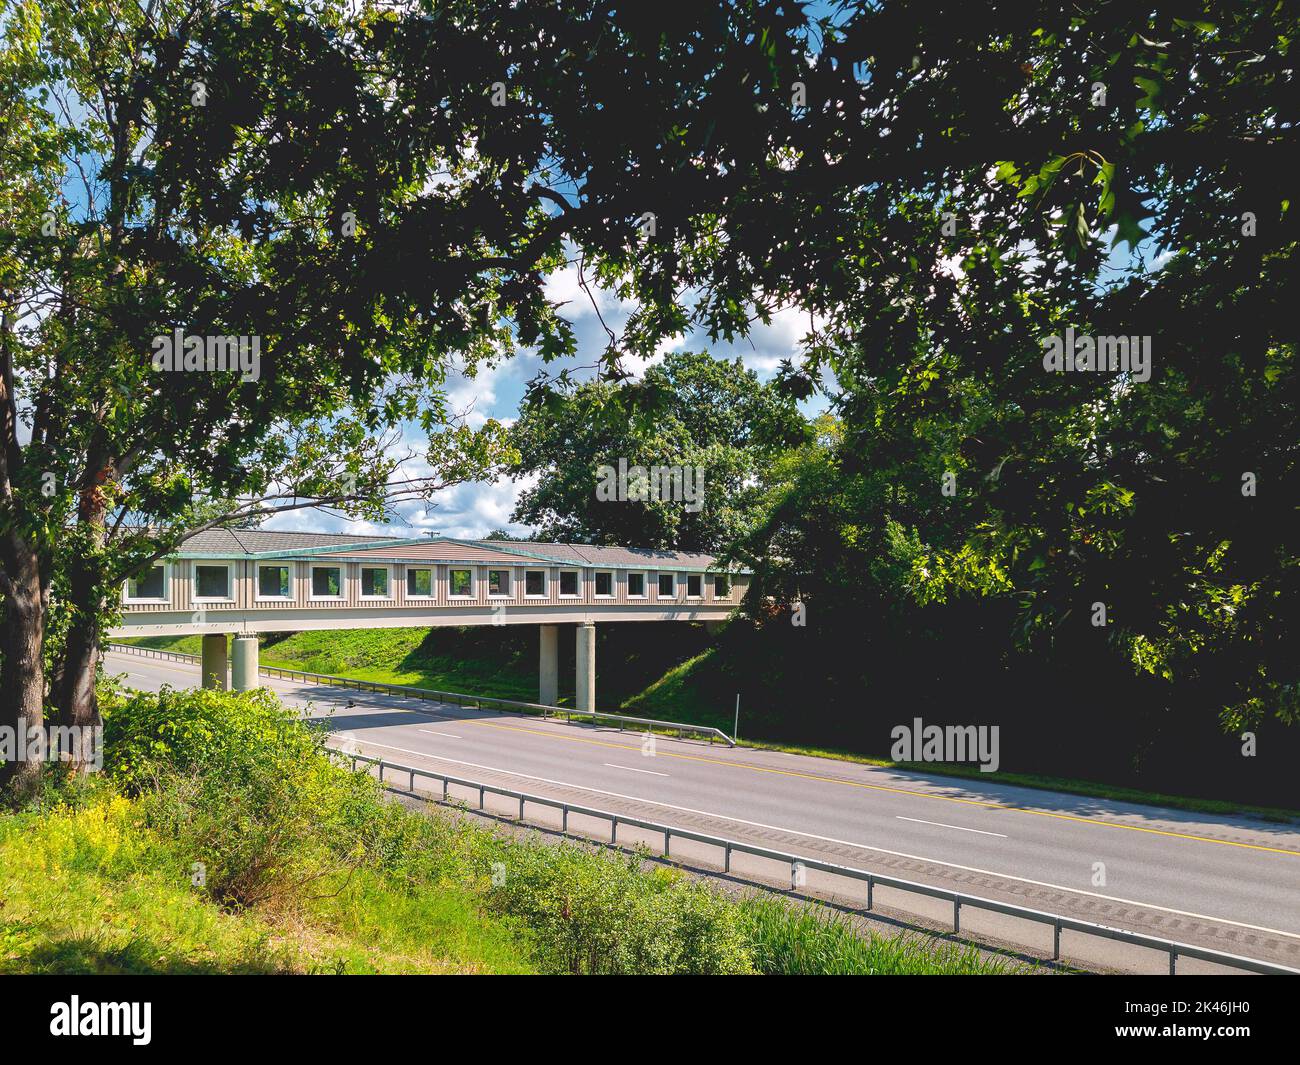 Angola, New York - Sep 8, 2022: Landscape Wide View of Angola Travel Service Plaza Bridge, which Cuts thru I-90 Thruway from the Parking Lot to the Sh Stock Photo